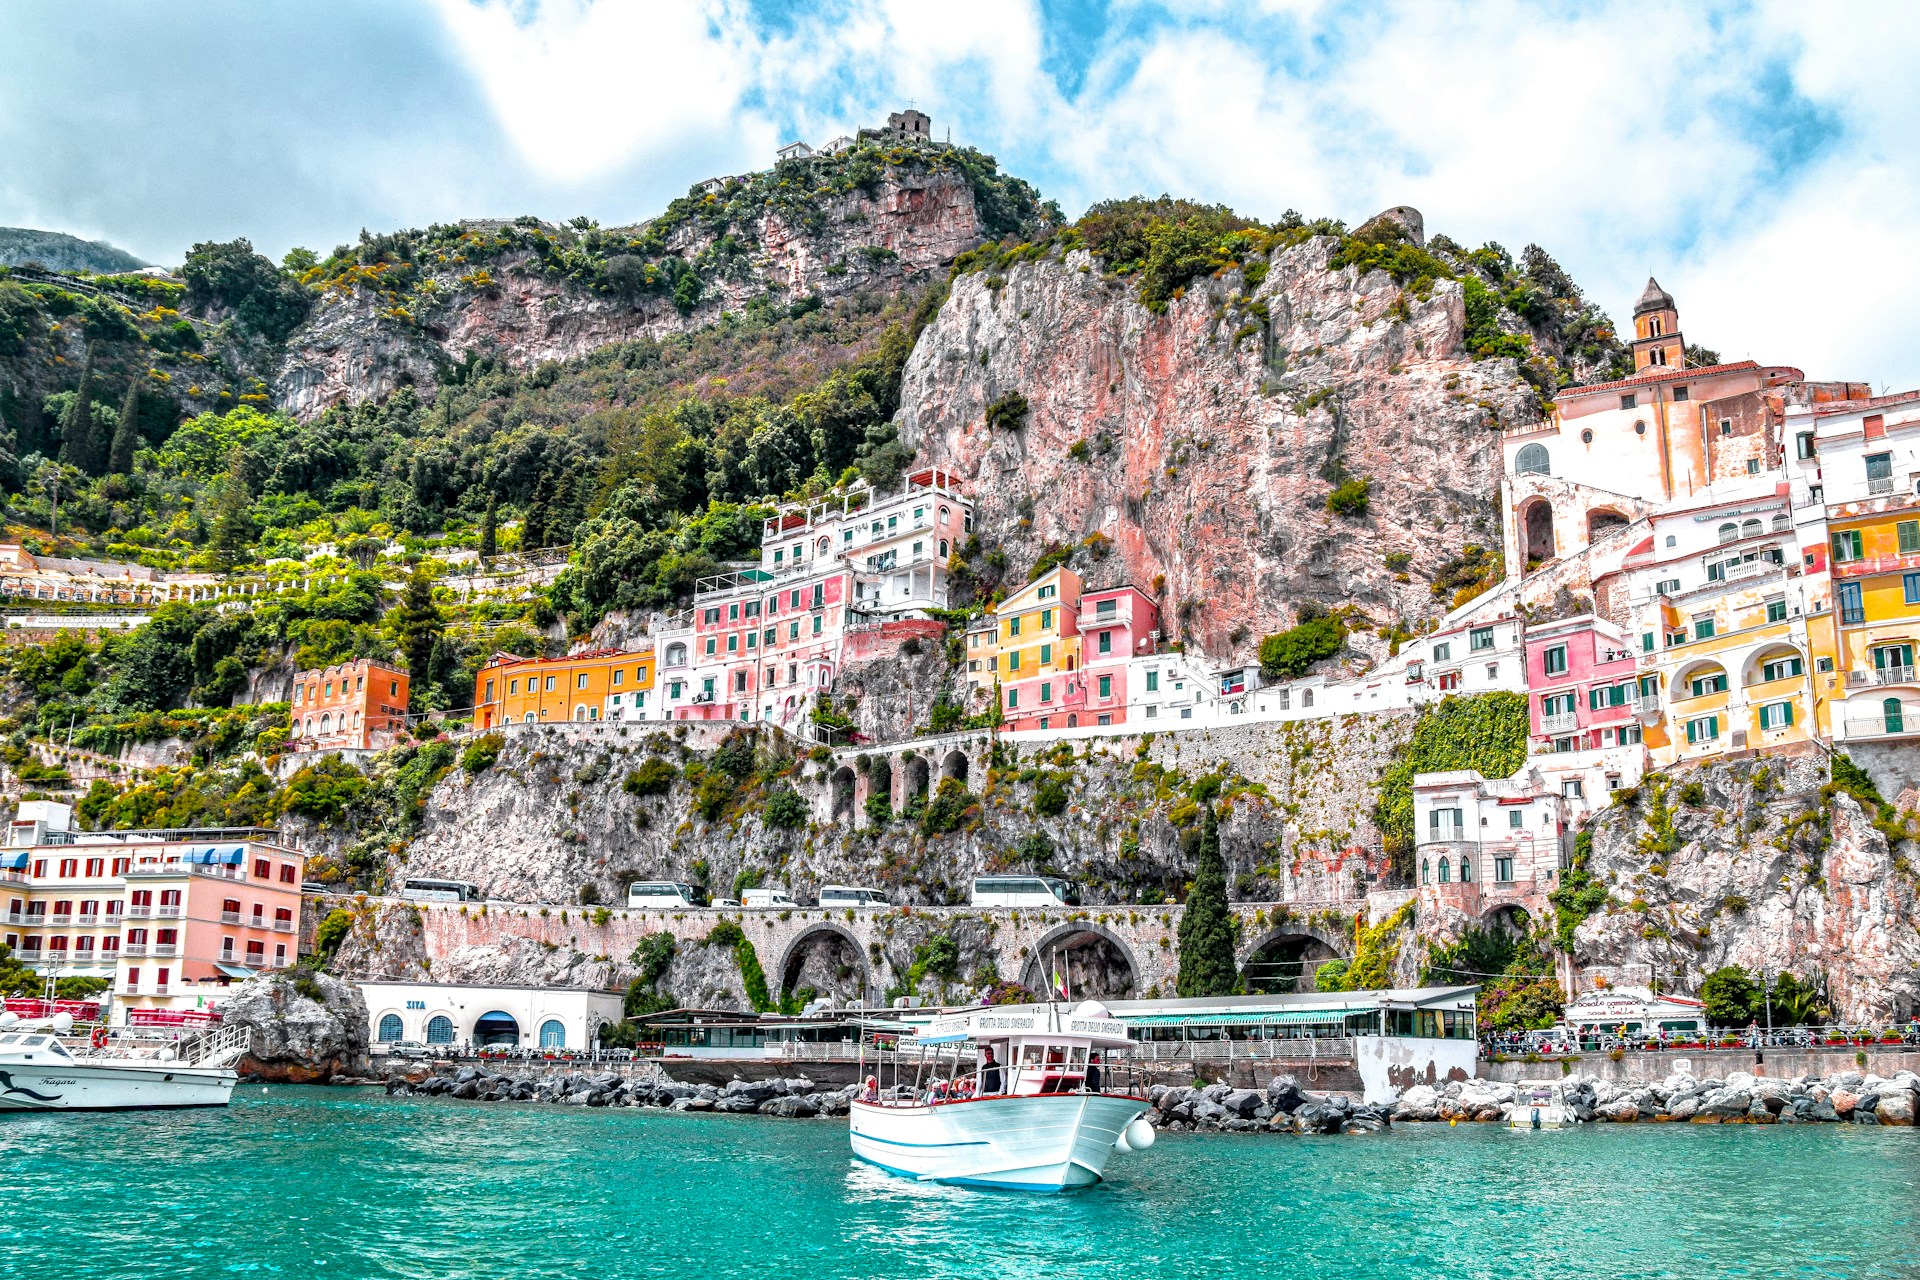 View of boats and the water in the Amalfi Coast, Italy